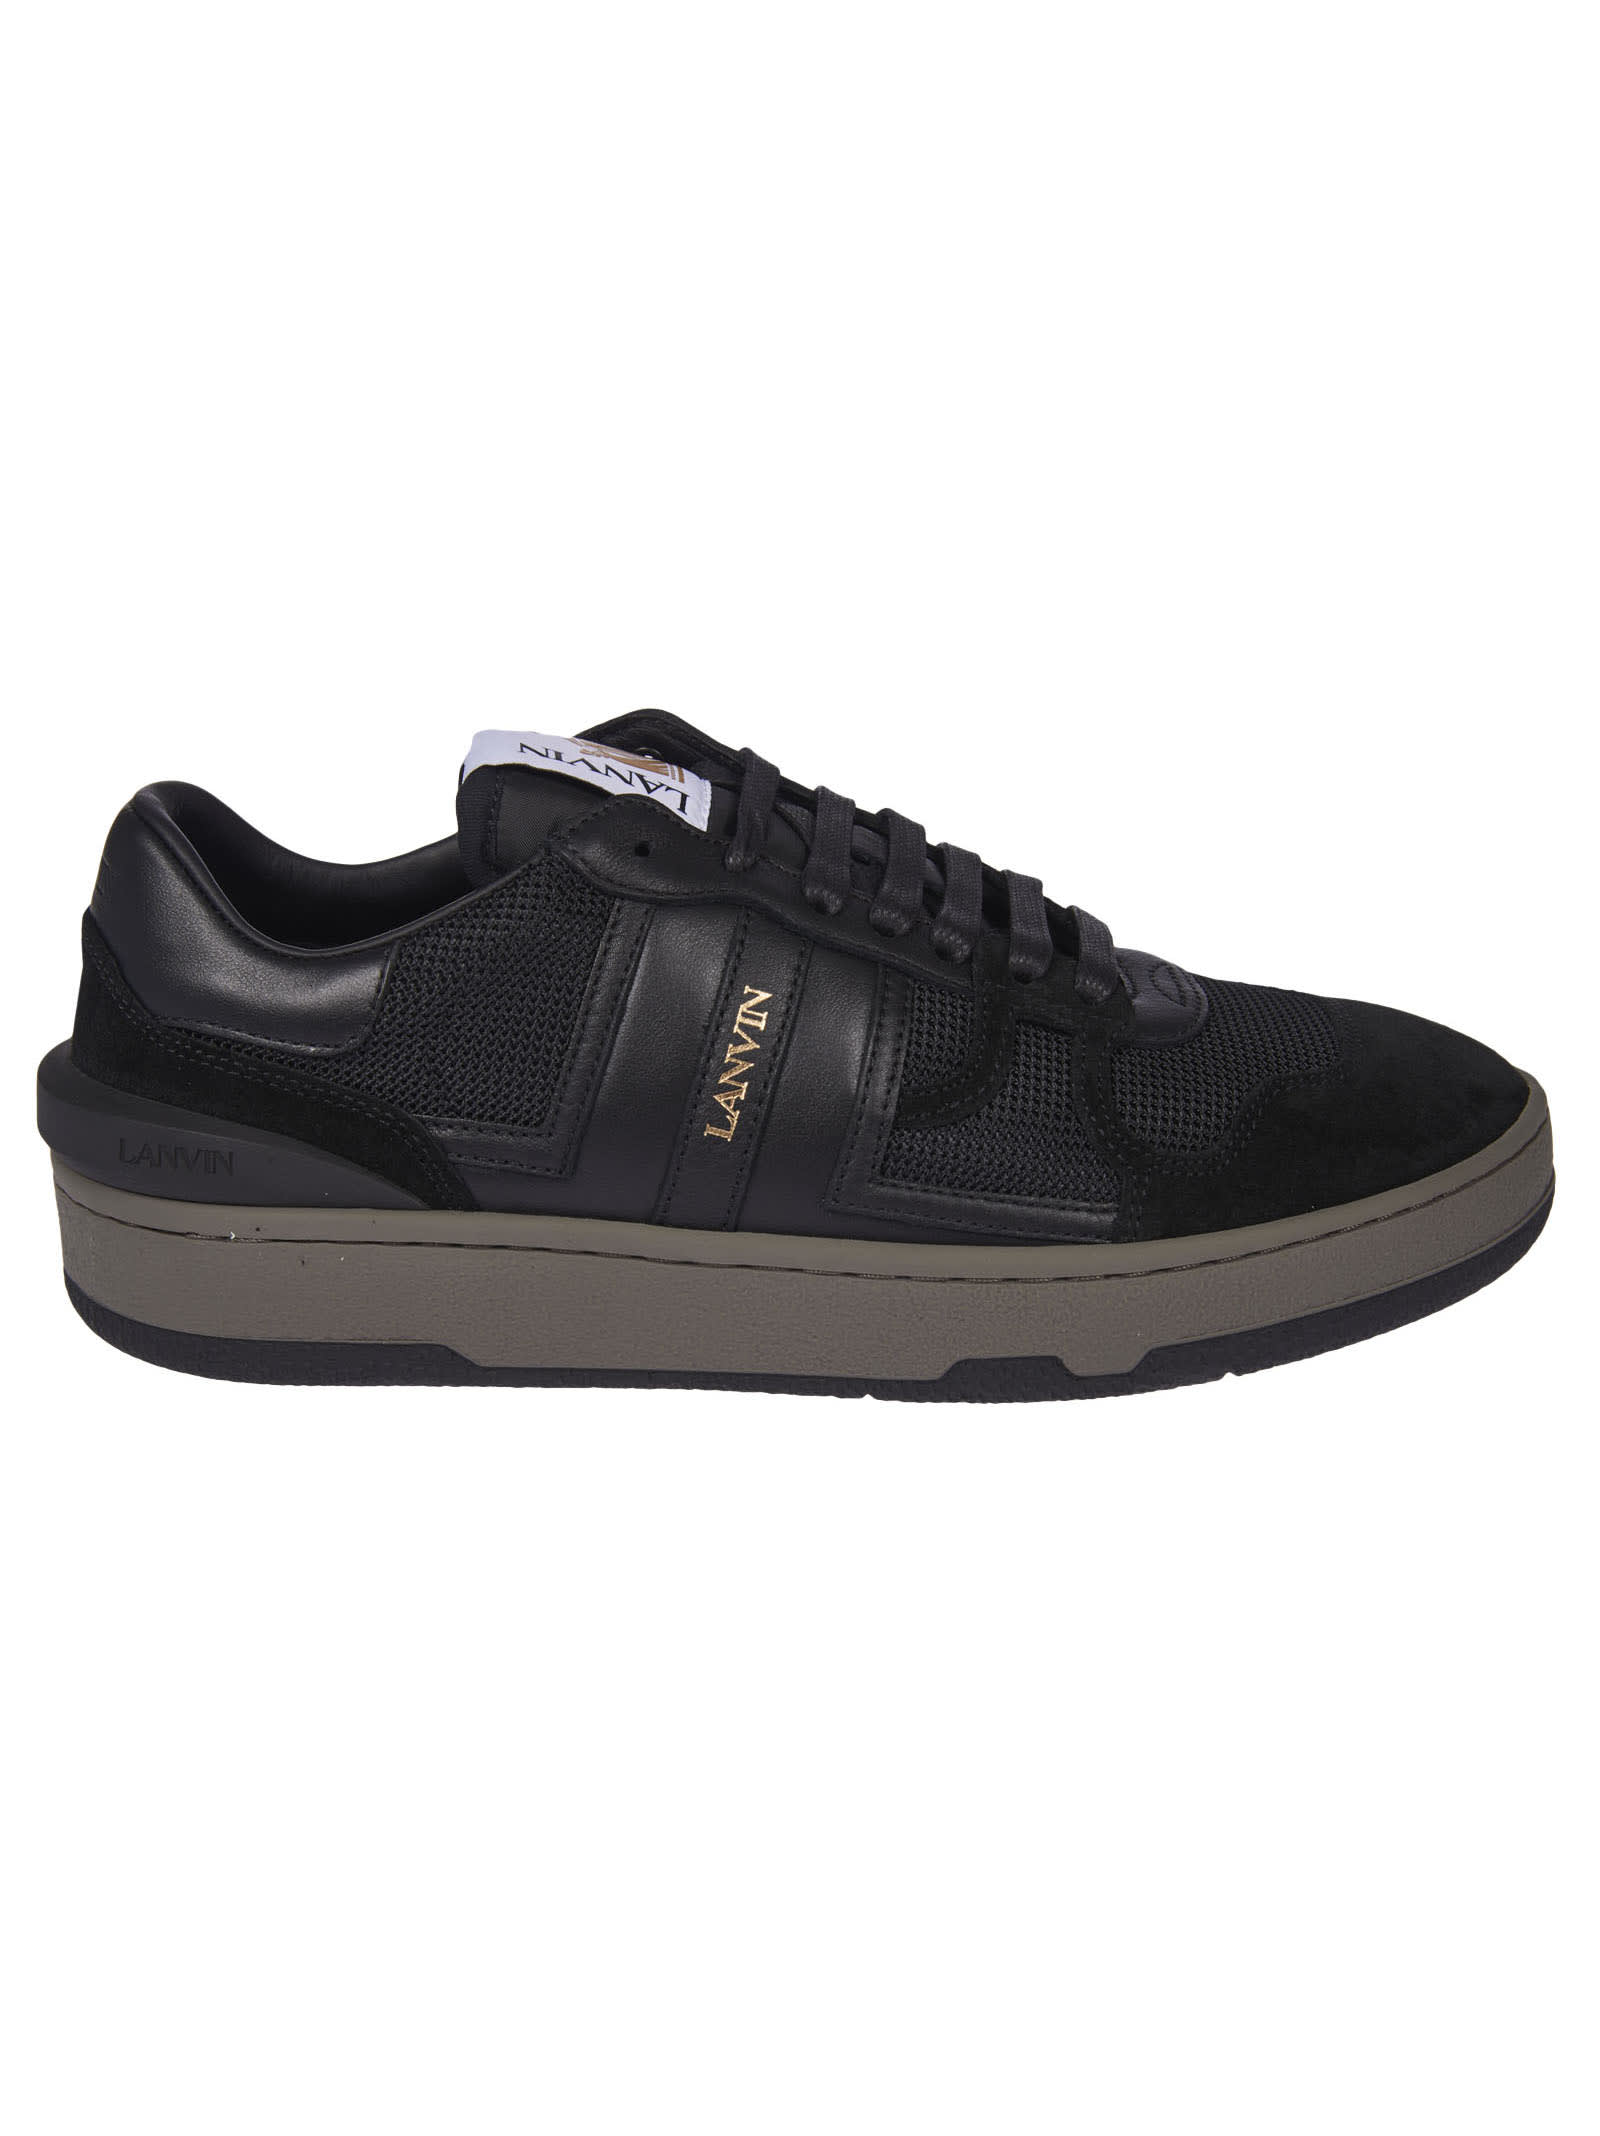 Buy Lanvin Tennis Low Top Sneakers online, shop Lanvin shoes with free shipping